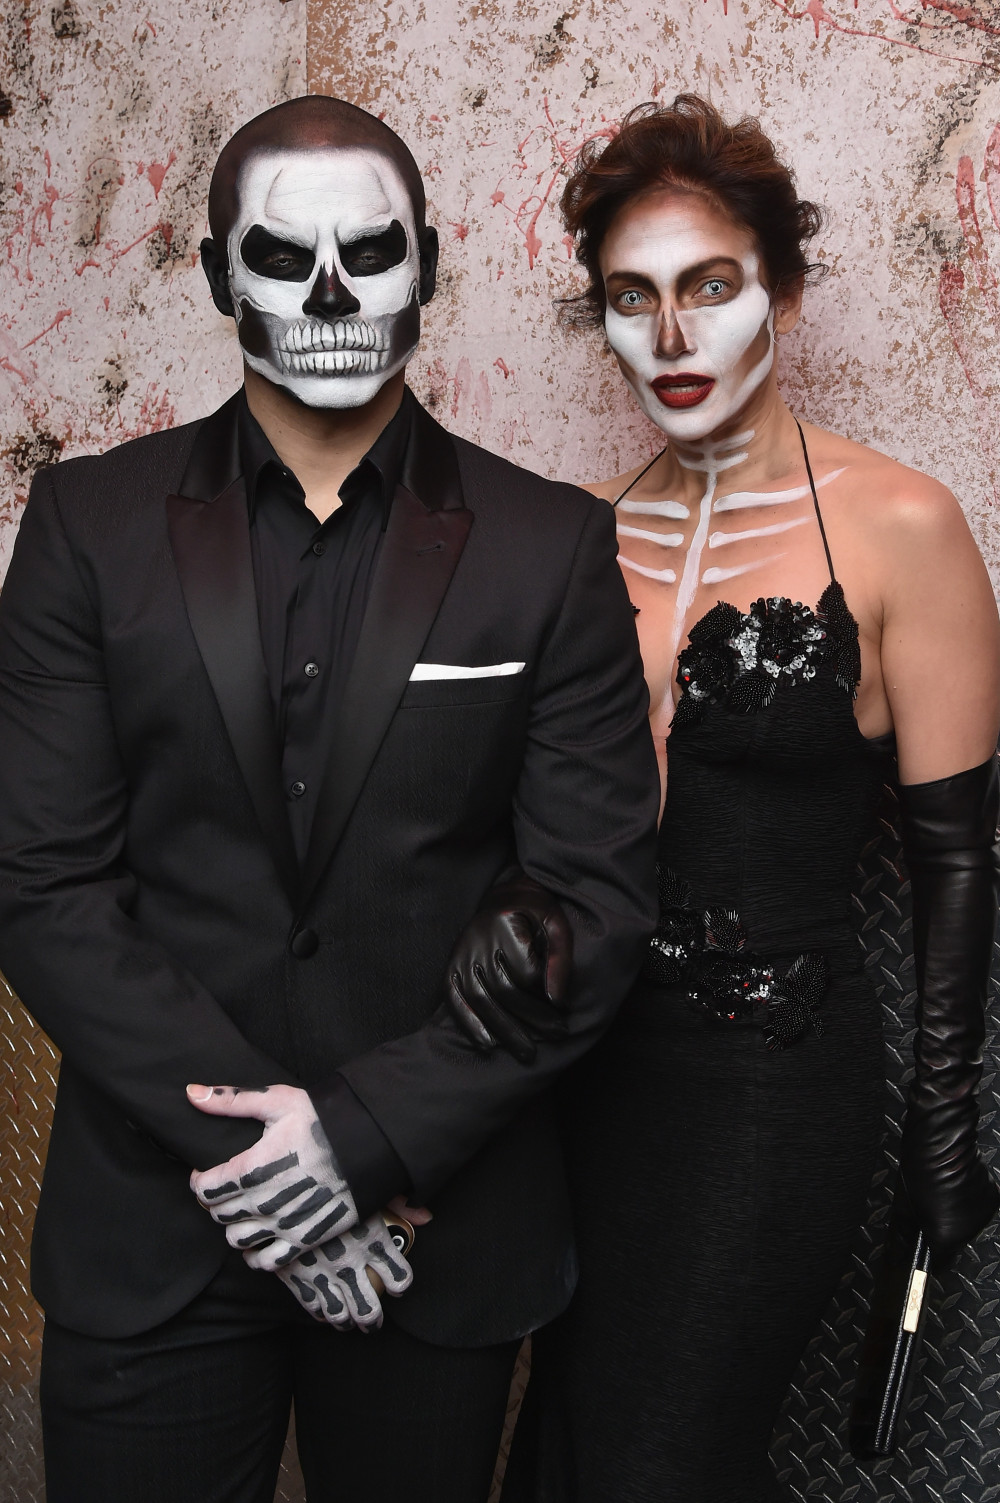 attends the Heidi Klum's 16th Annual Halloween Party sponsored by GSN's Hellevator And SVEDKA Vodka At LAVO New York on October 31, 2015 in New York City.